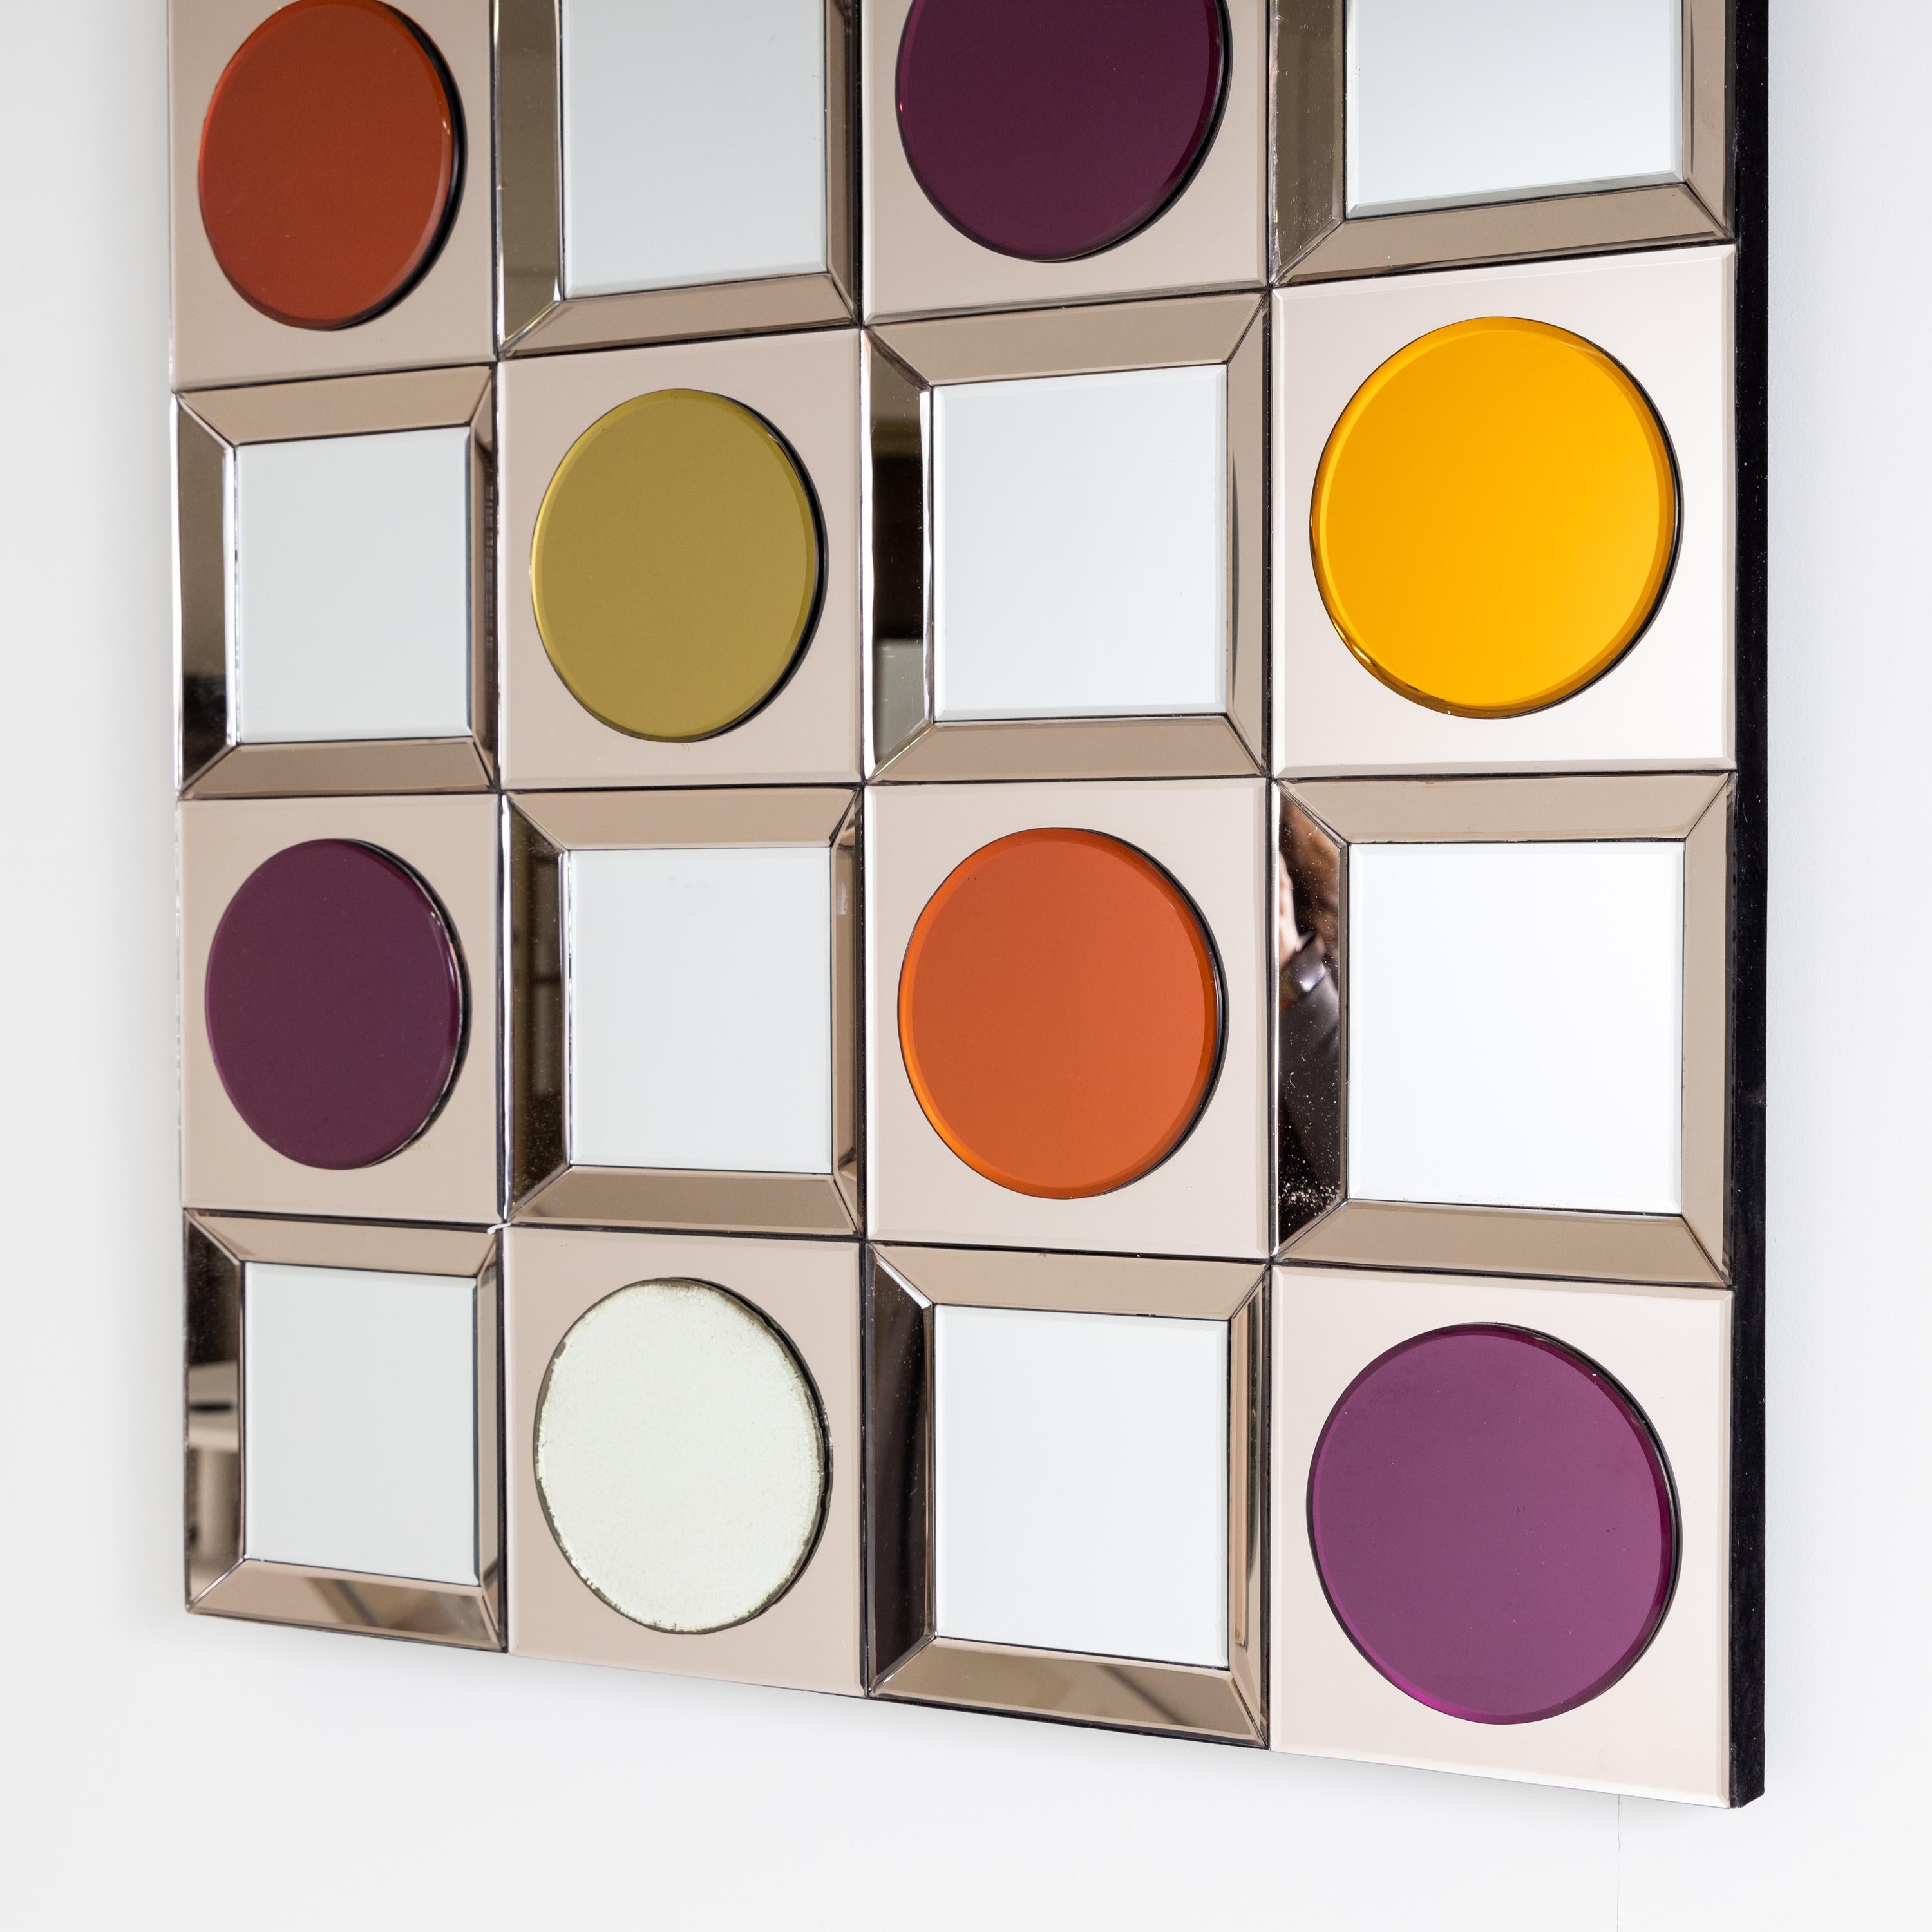 Large wall mirror with alternating square and round coloured glass elements by Olivier de Schrijver (b. 1958). Signed and numbered 2/24.